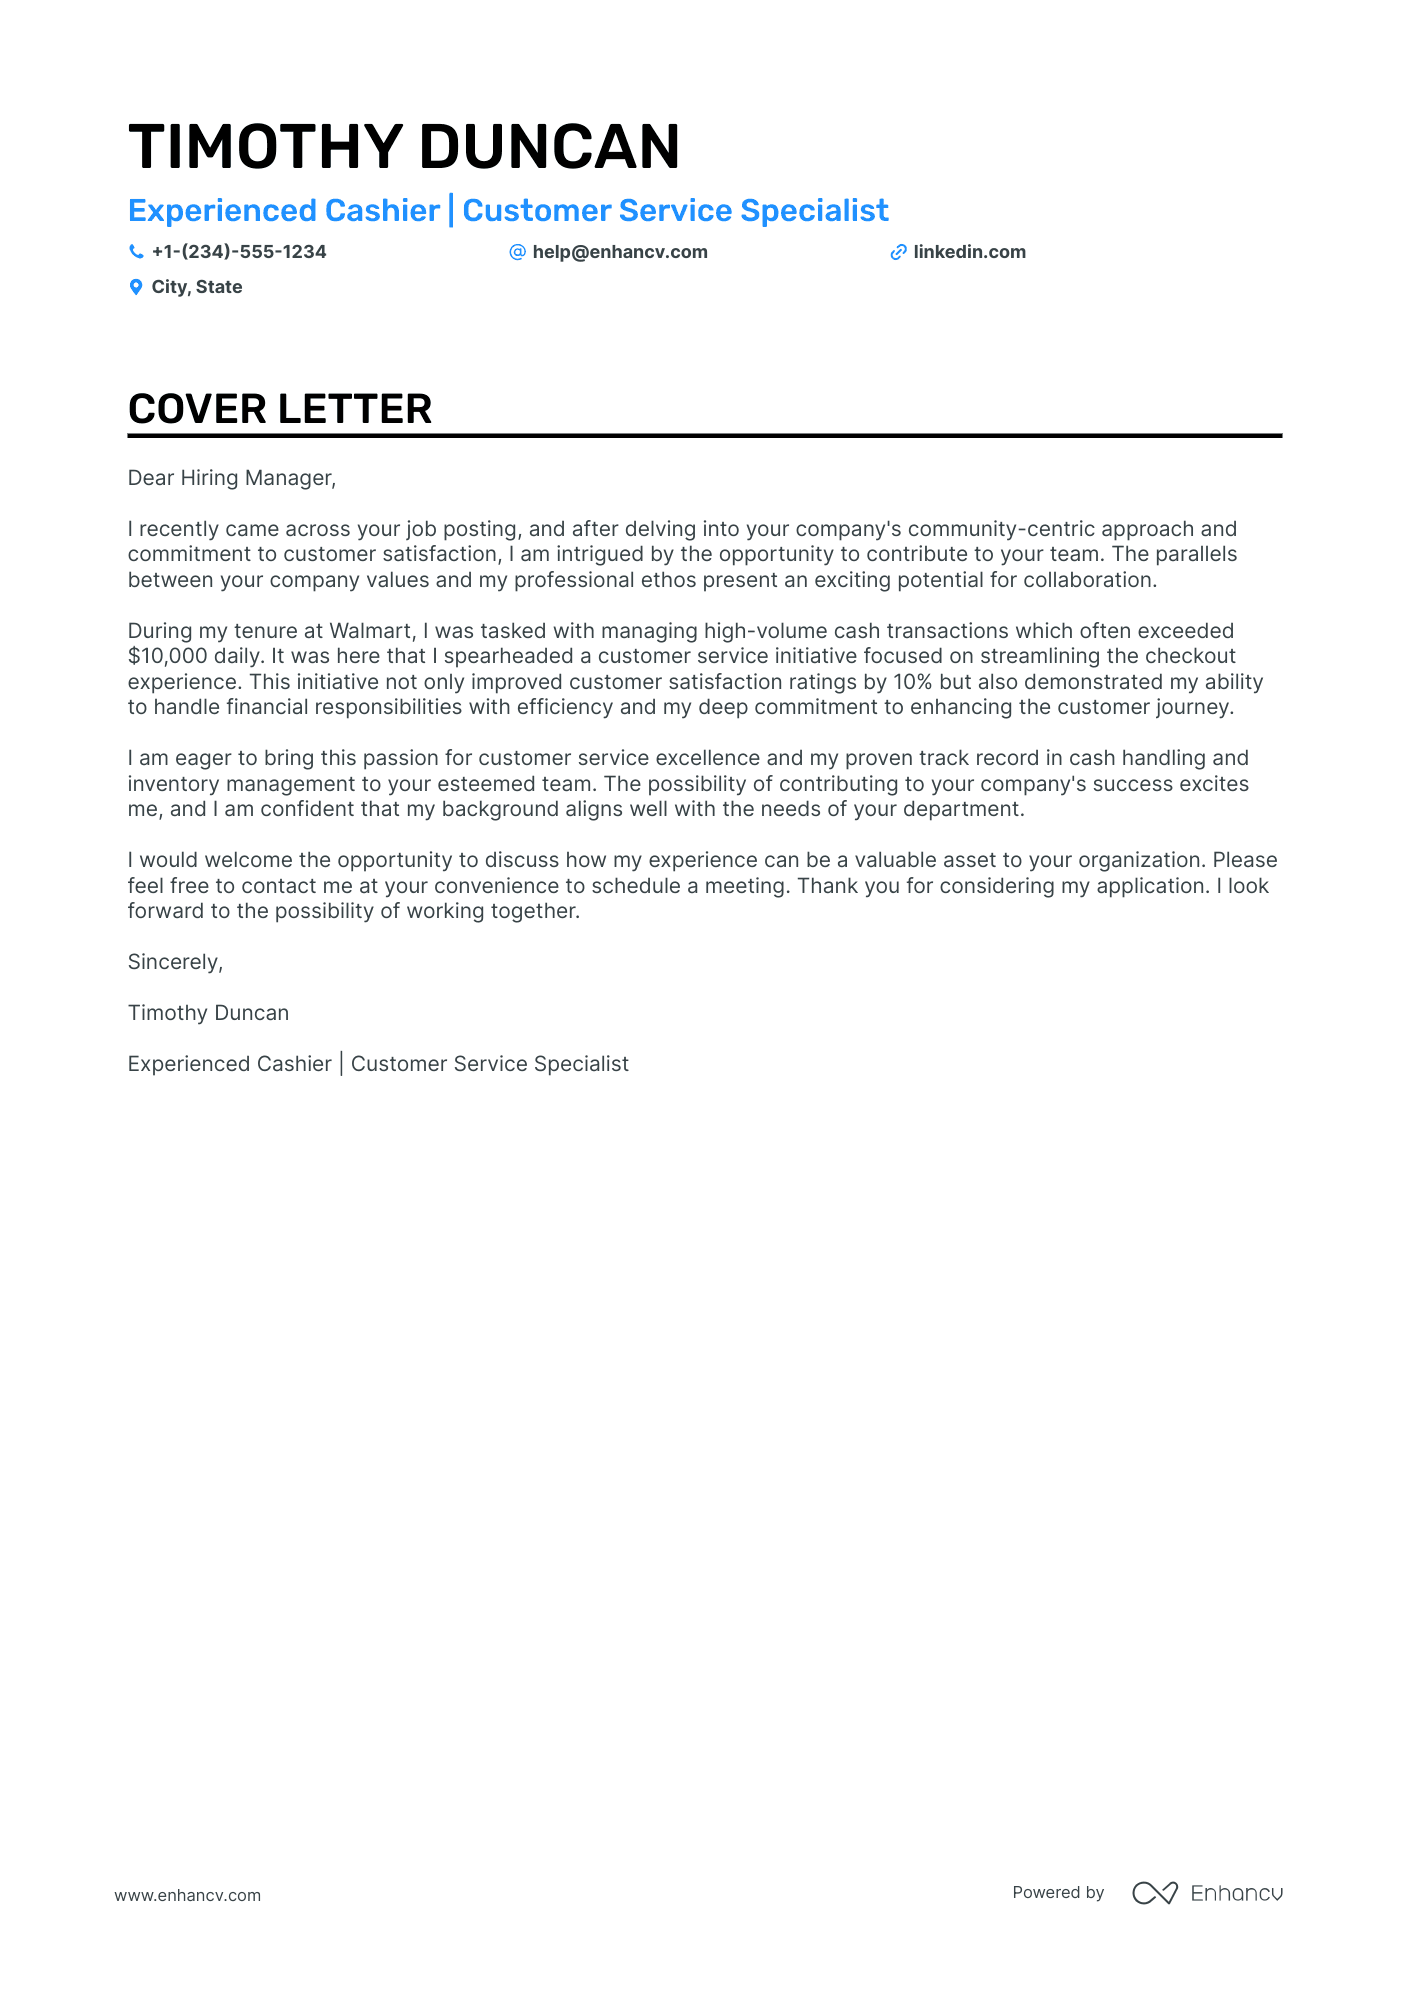 cover letter sample for a cashier